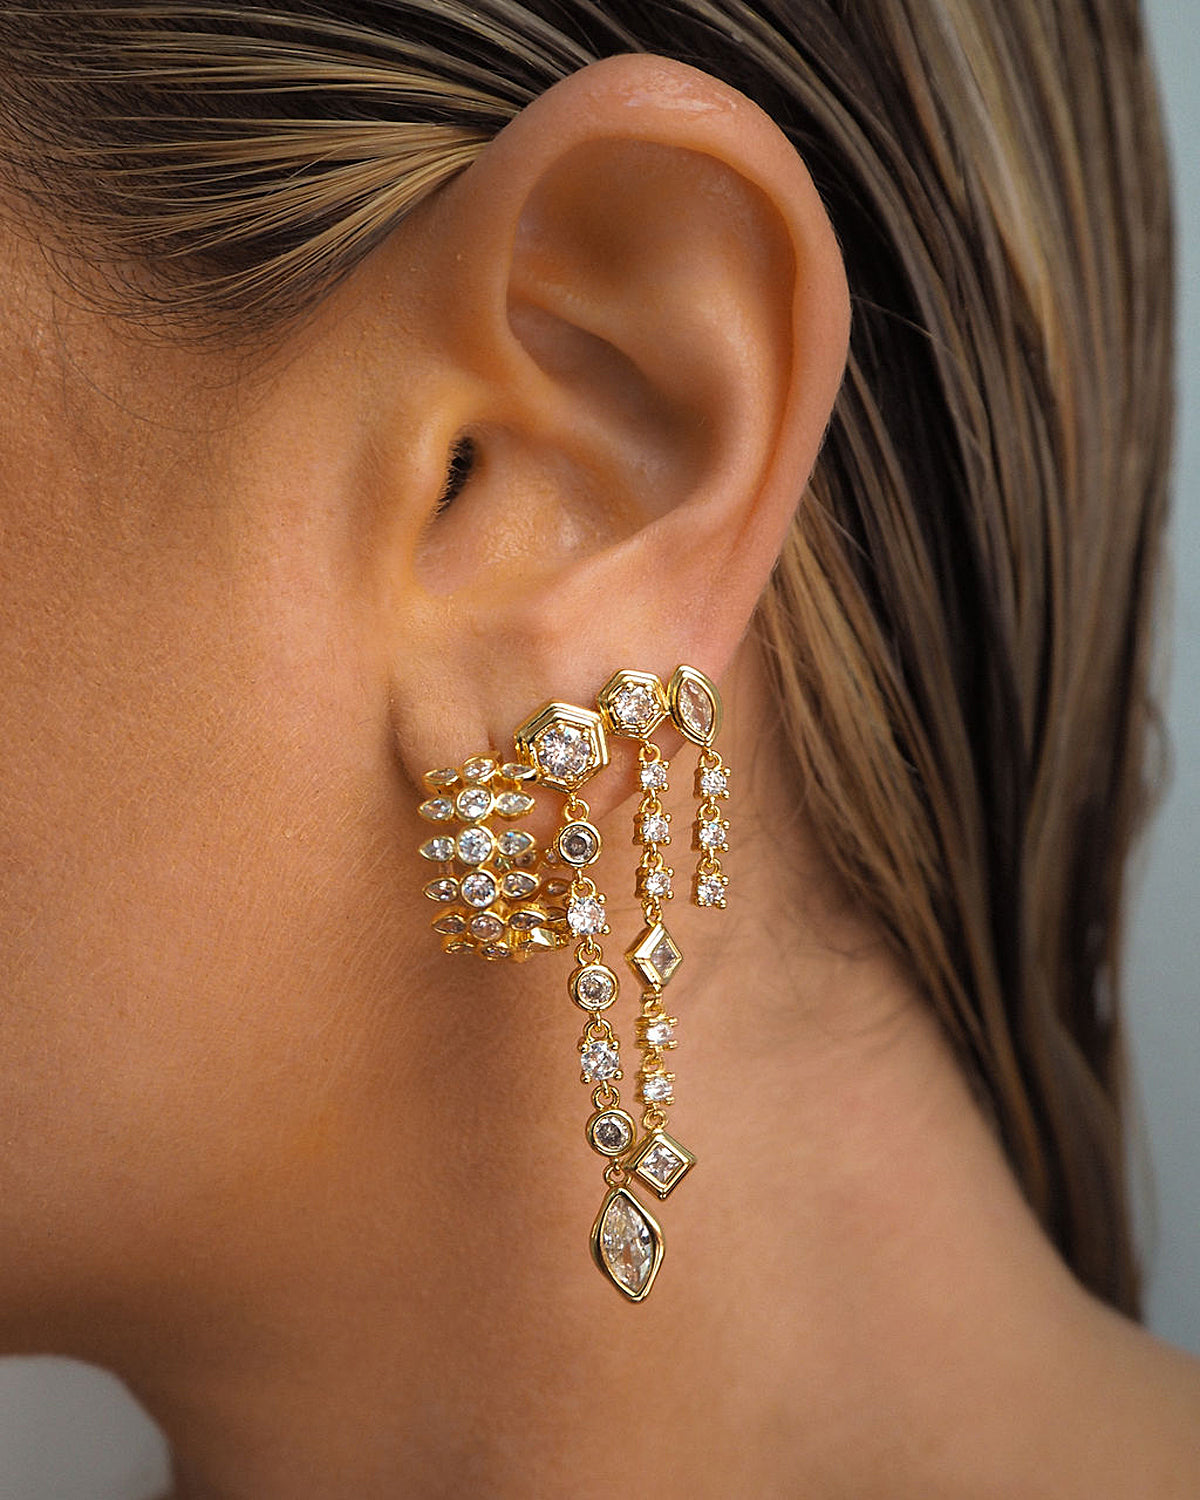 Luv Aj Florette Hoop Earrings in CZ and Polished Gold Plated